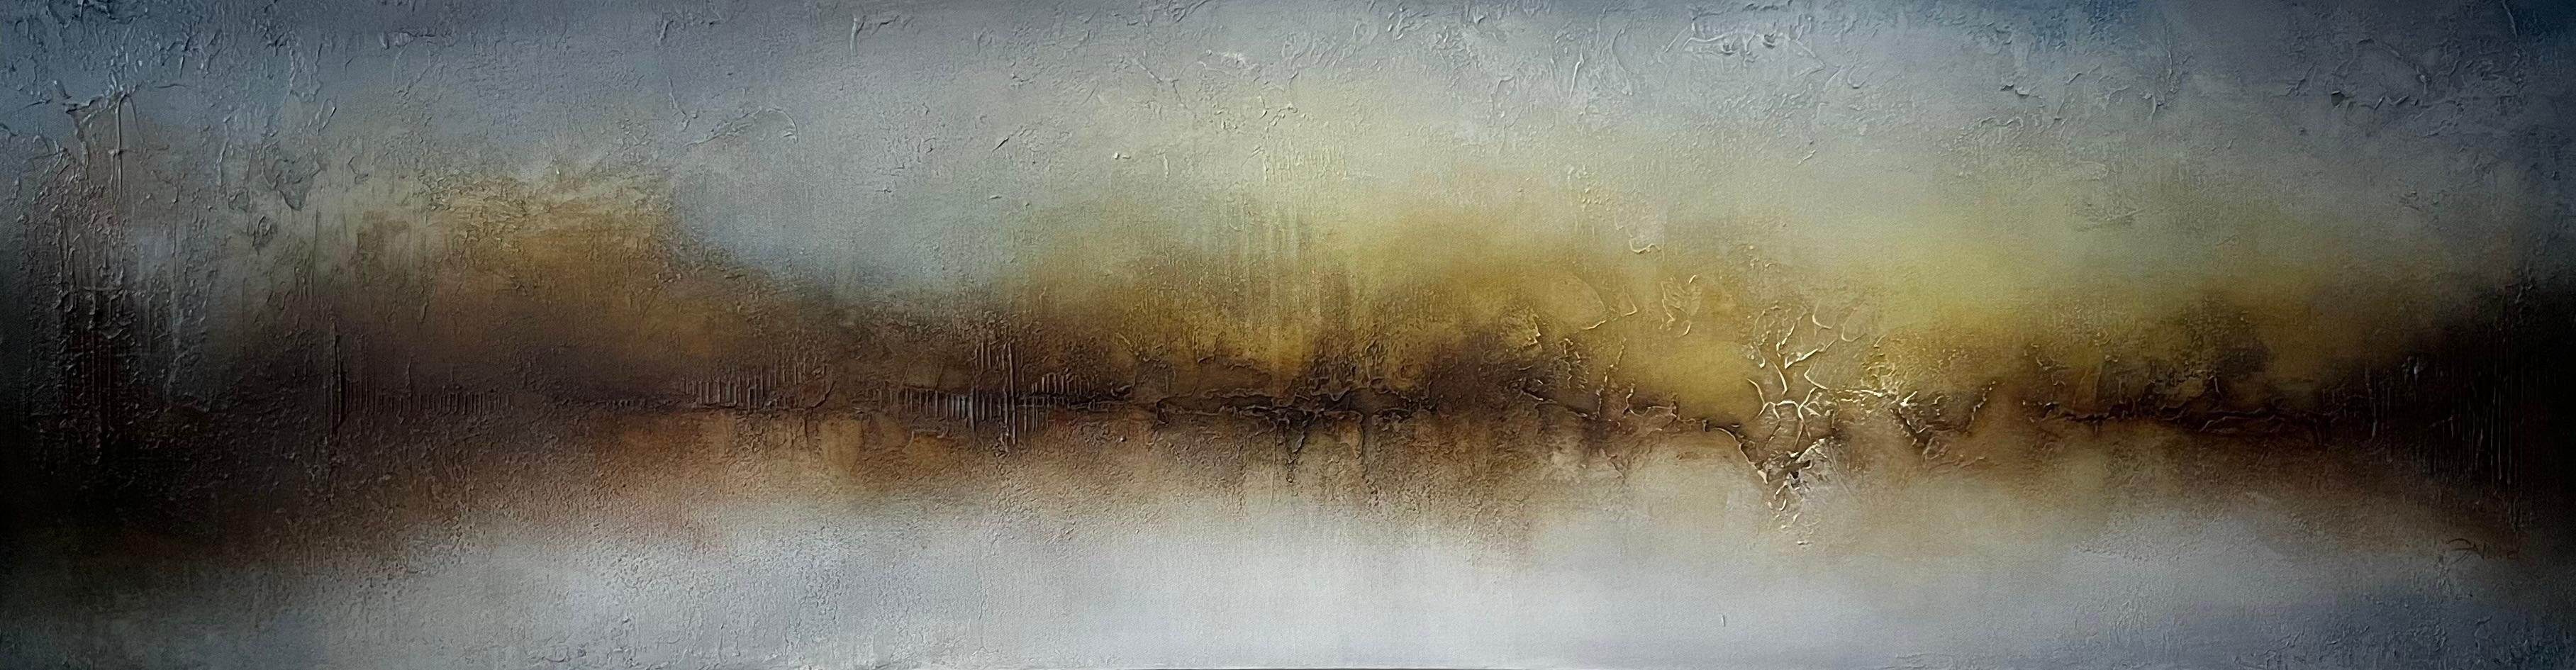 Force-original modern abstract lake landscape painting- artwork-contemporary art